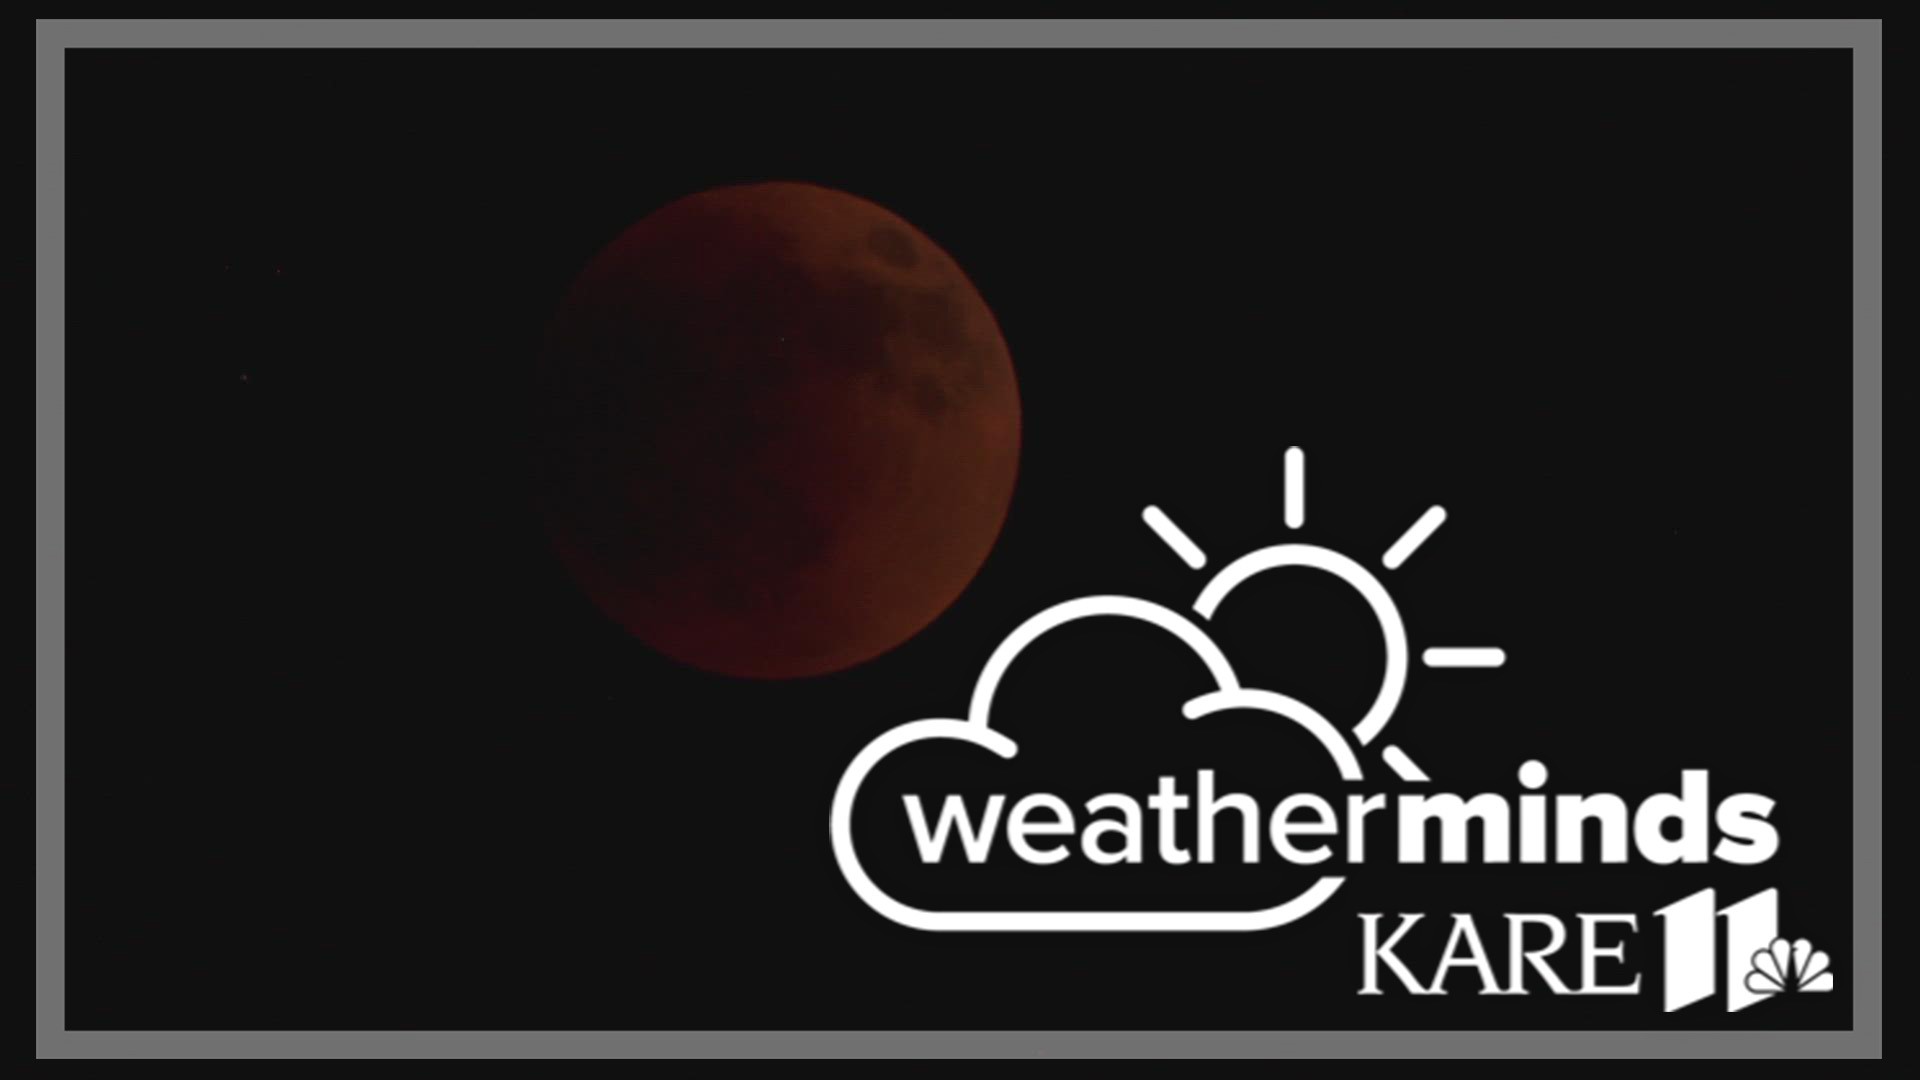 The moon will turn red starting at 4:16 a.m. Tuesday, and will remain that color until 5:41 a.m.